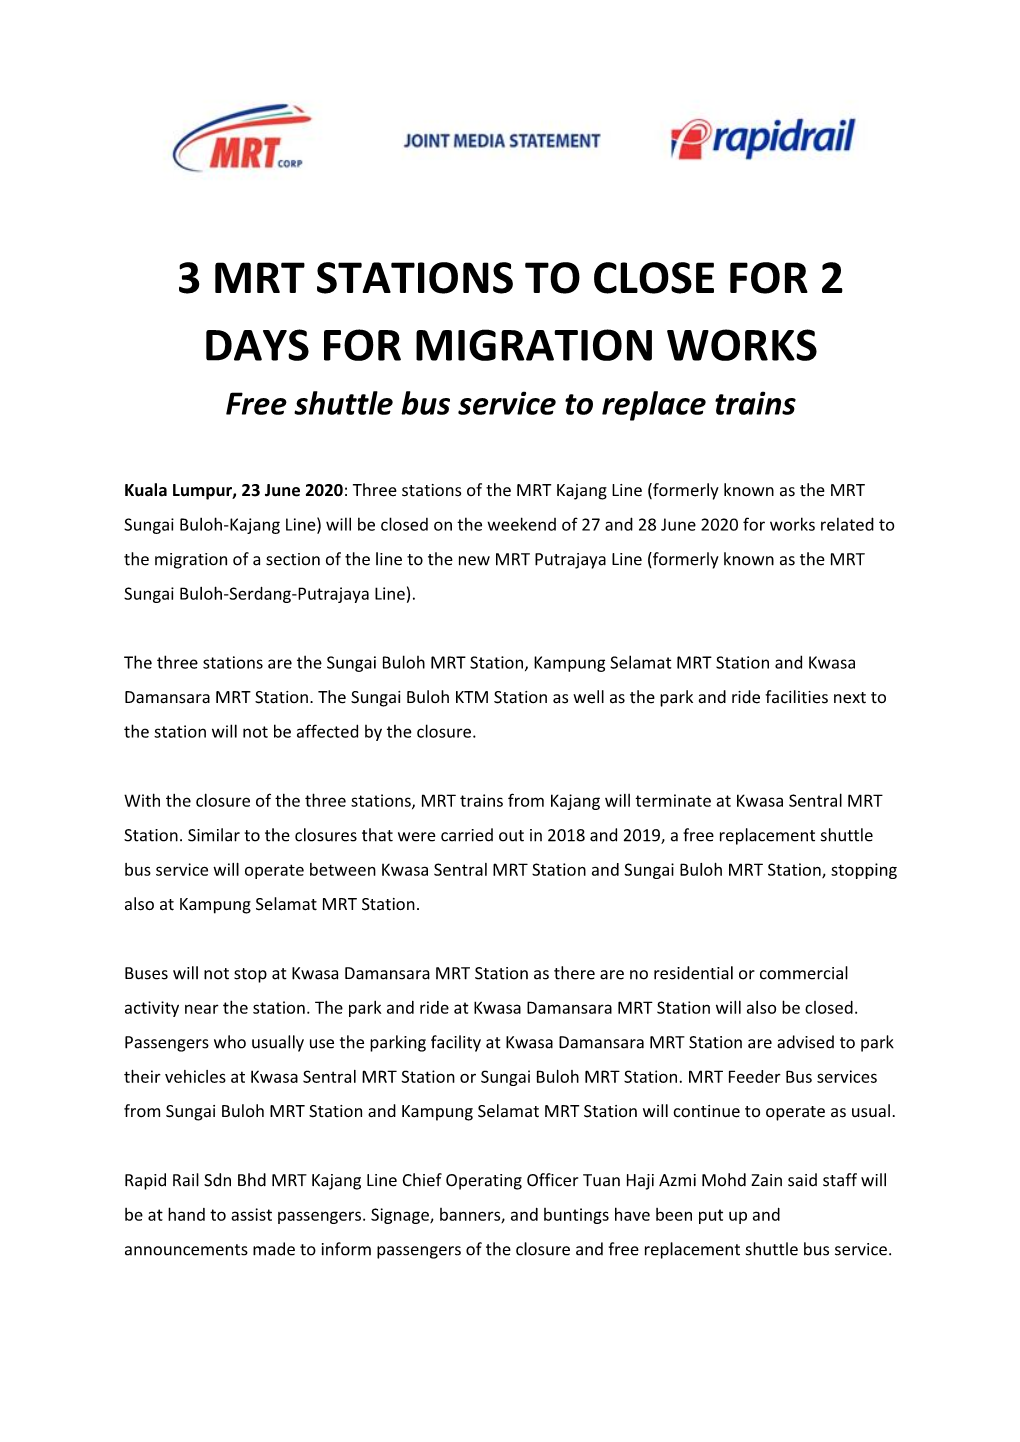 3 MRT STATIONS to CLOSE for 2 DAYS for MIGRATION WORKS Free Shuttle Bus Service to Replace Trains